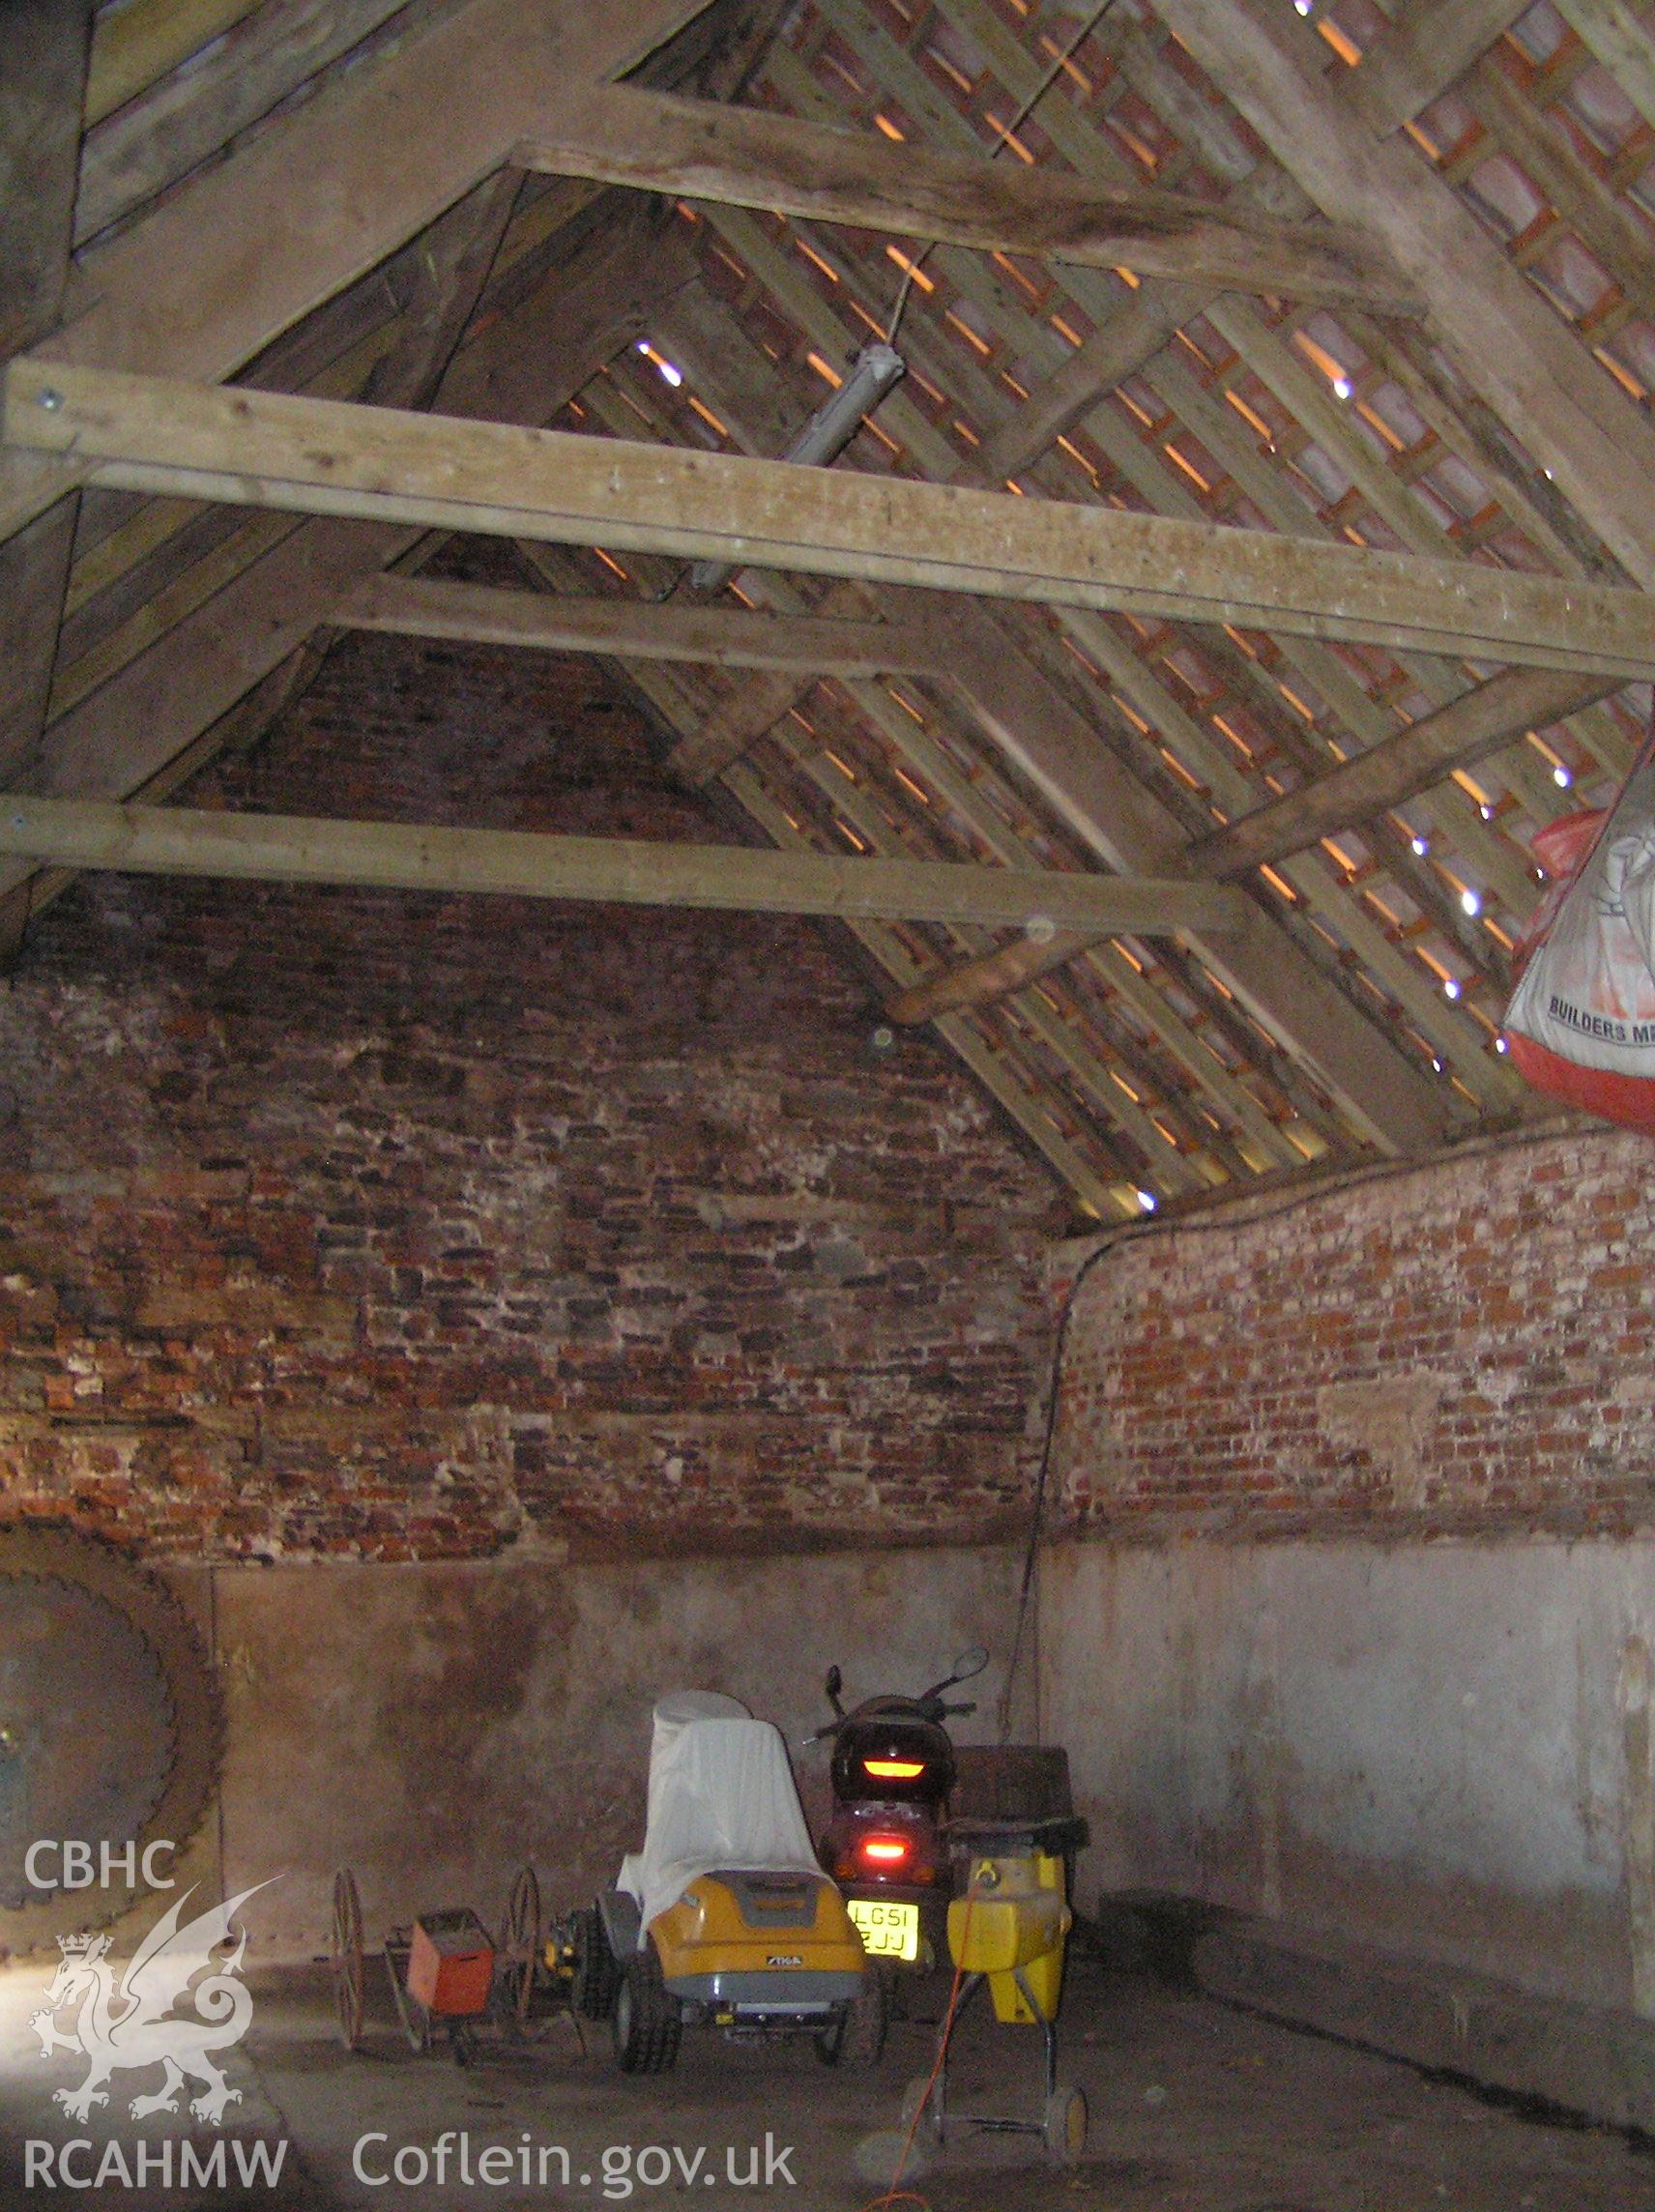 Colour photo showing interior view of the cowhouse looking south, taken by John Wheelock and donated as a condition of planning consent.